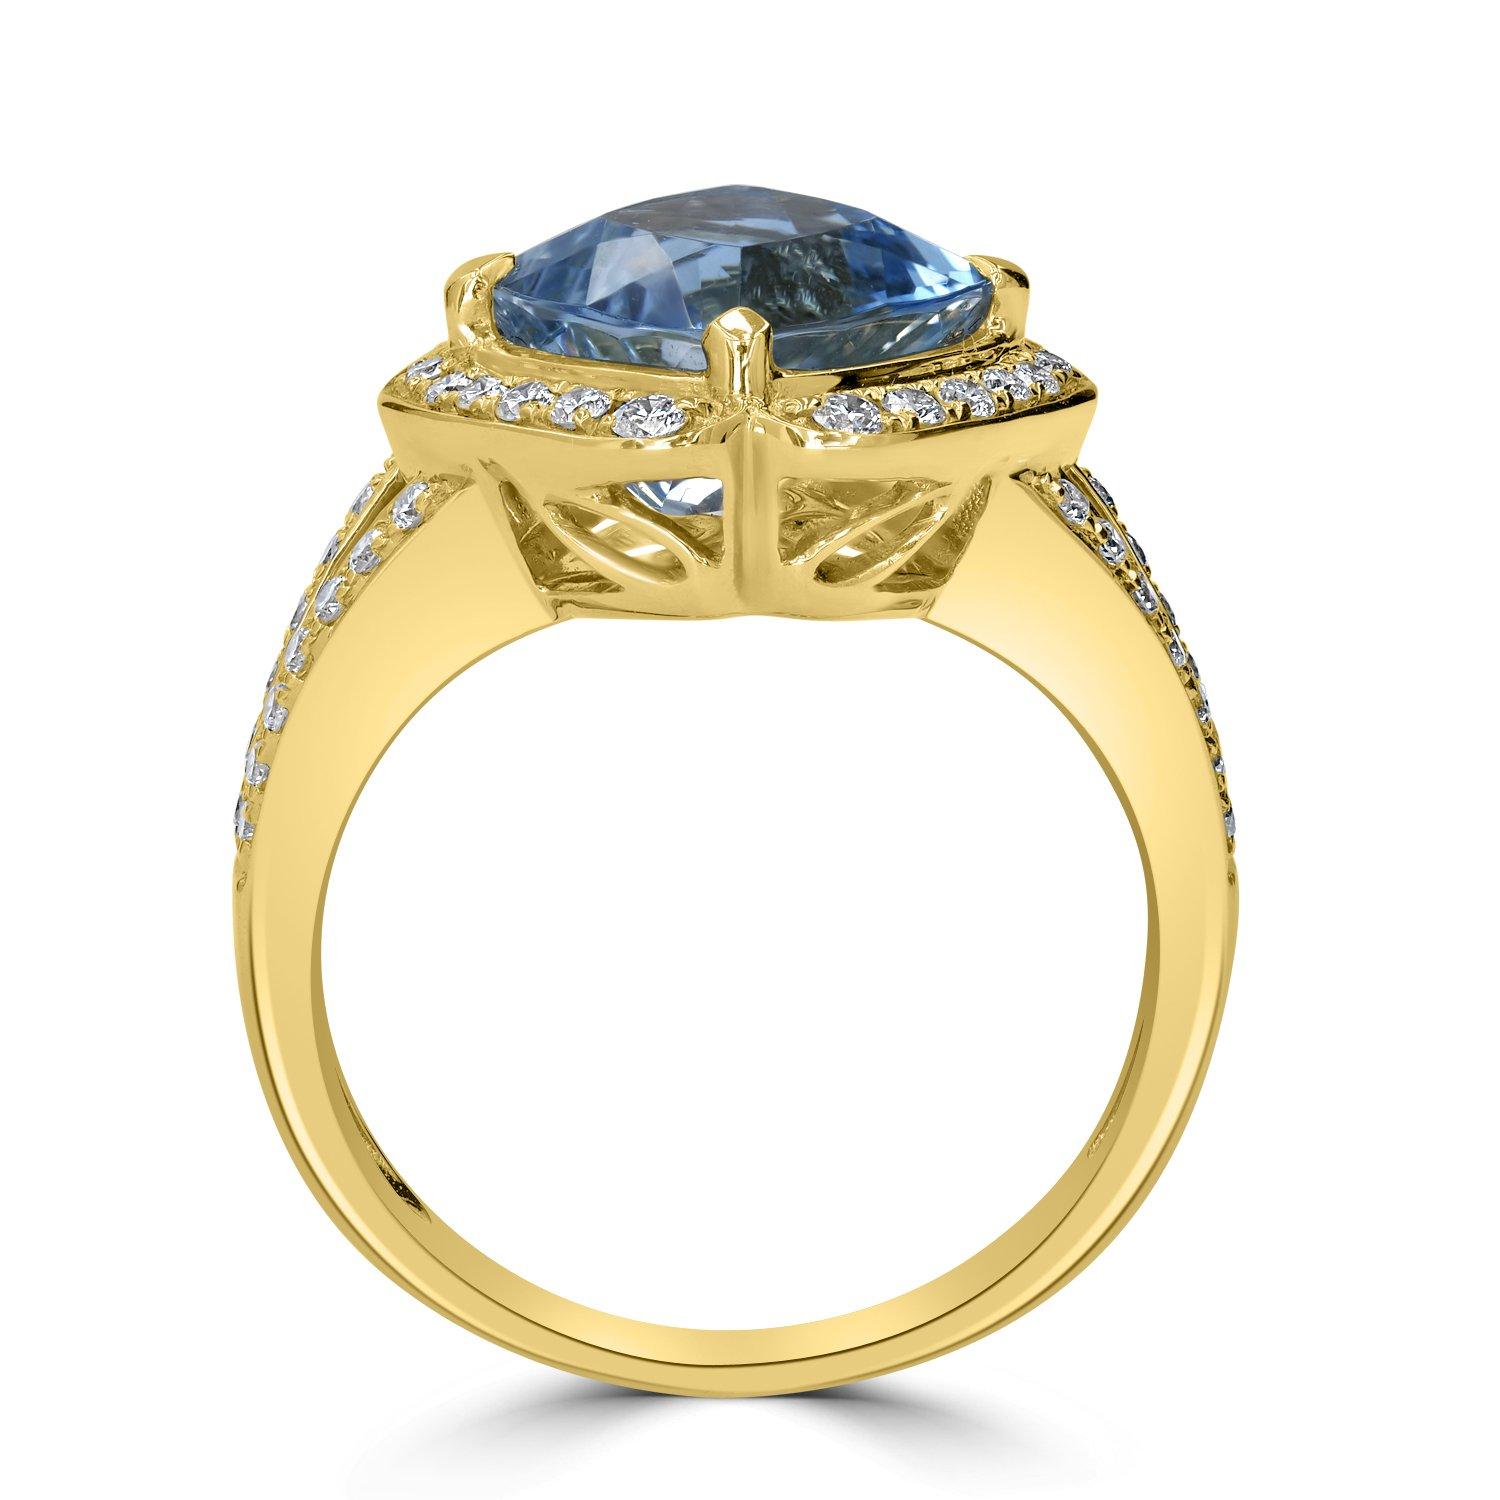 3.12ct Aquamarine Ring with 0.42Tct Diamonds Set in 14K Yellow Gold For Sale 1